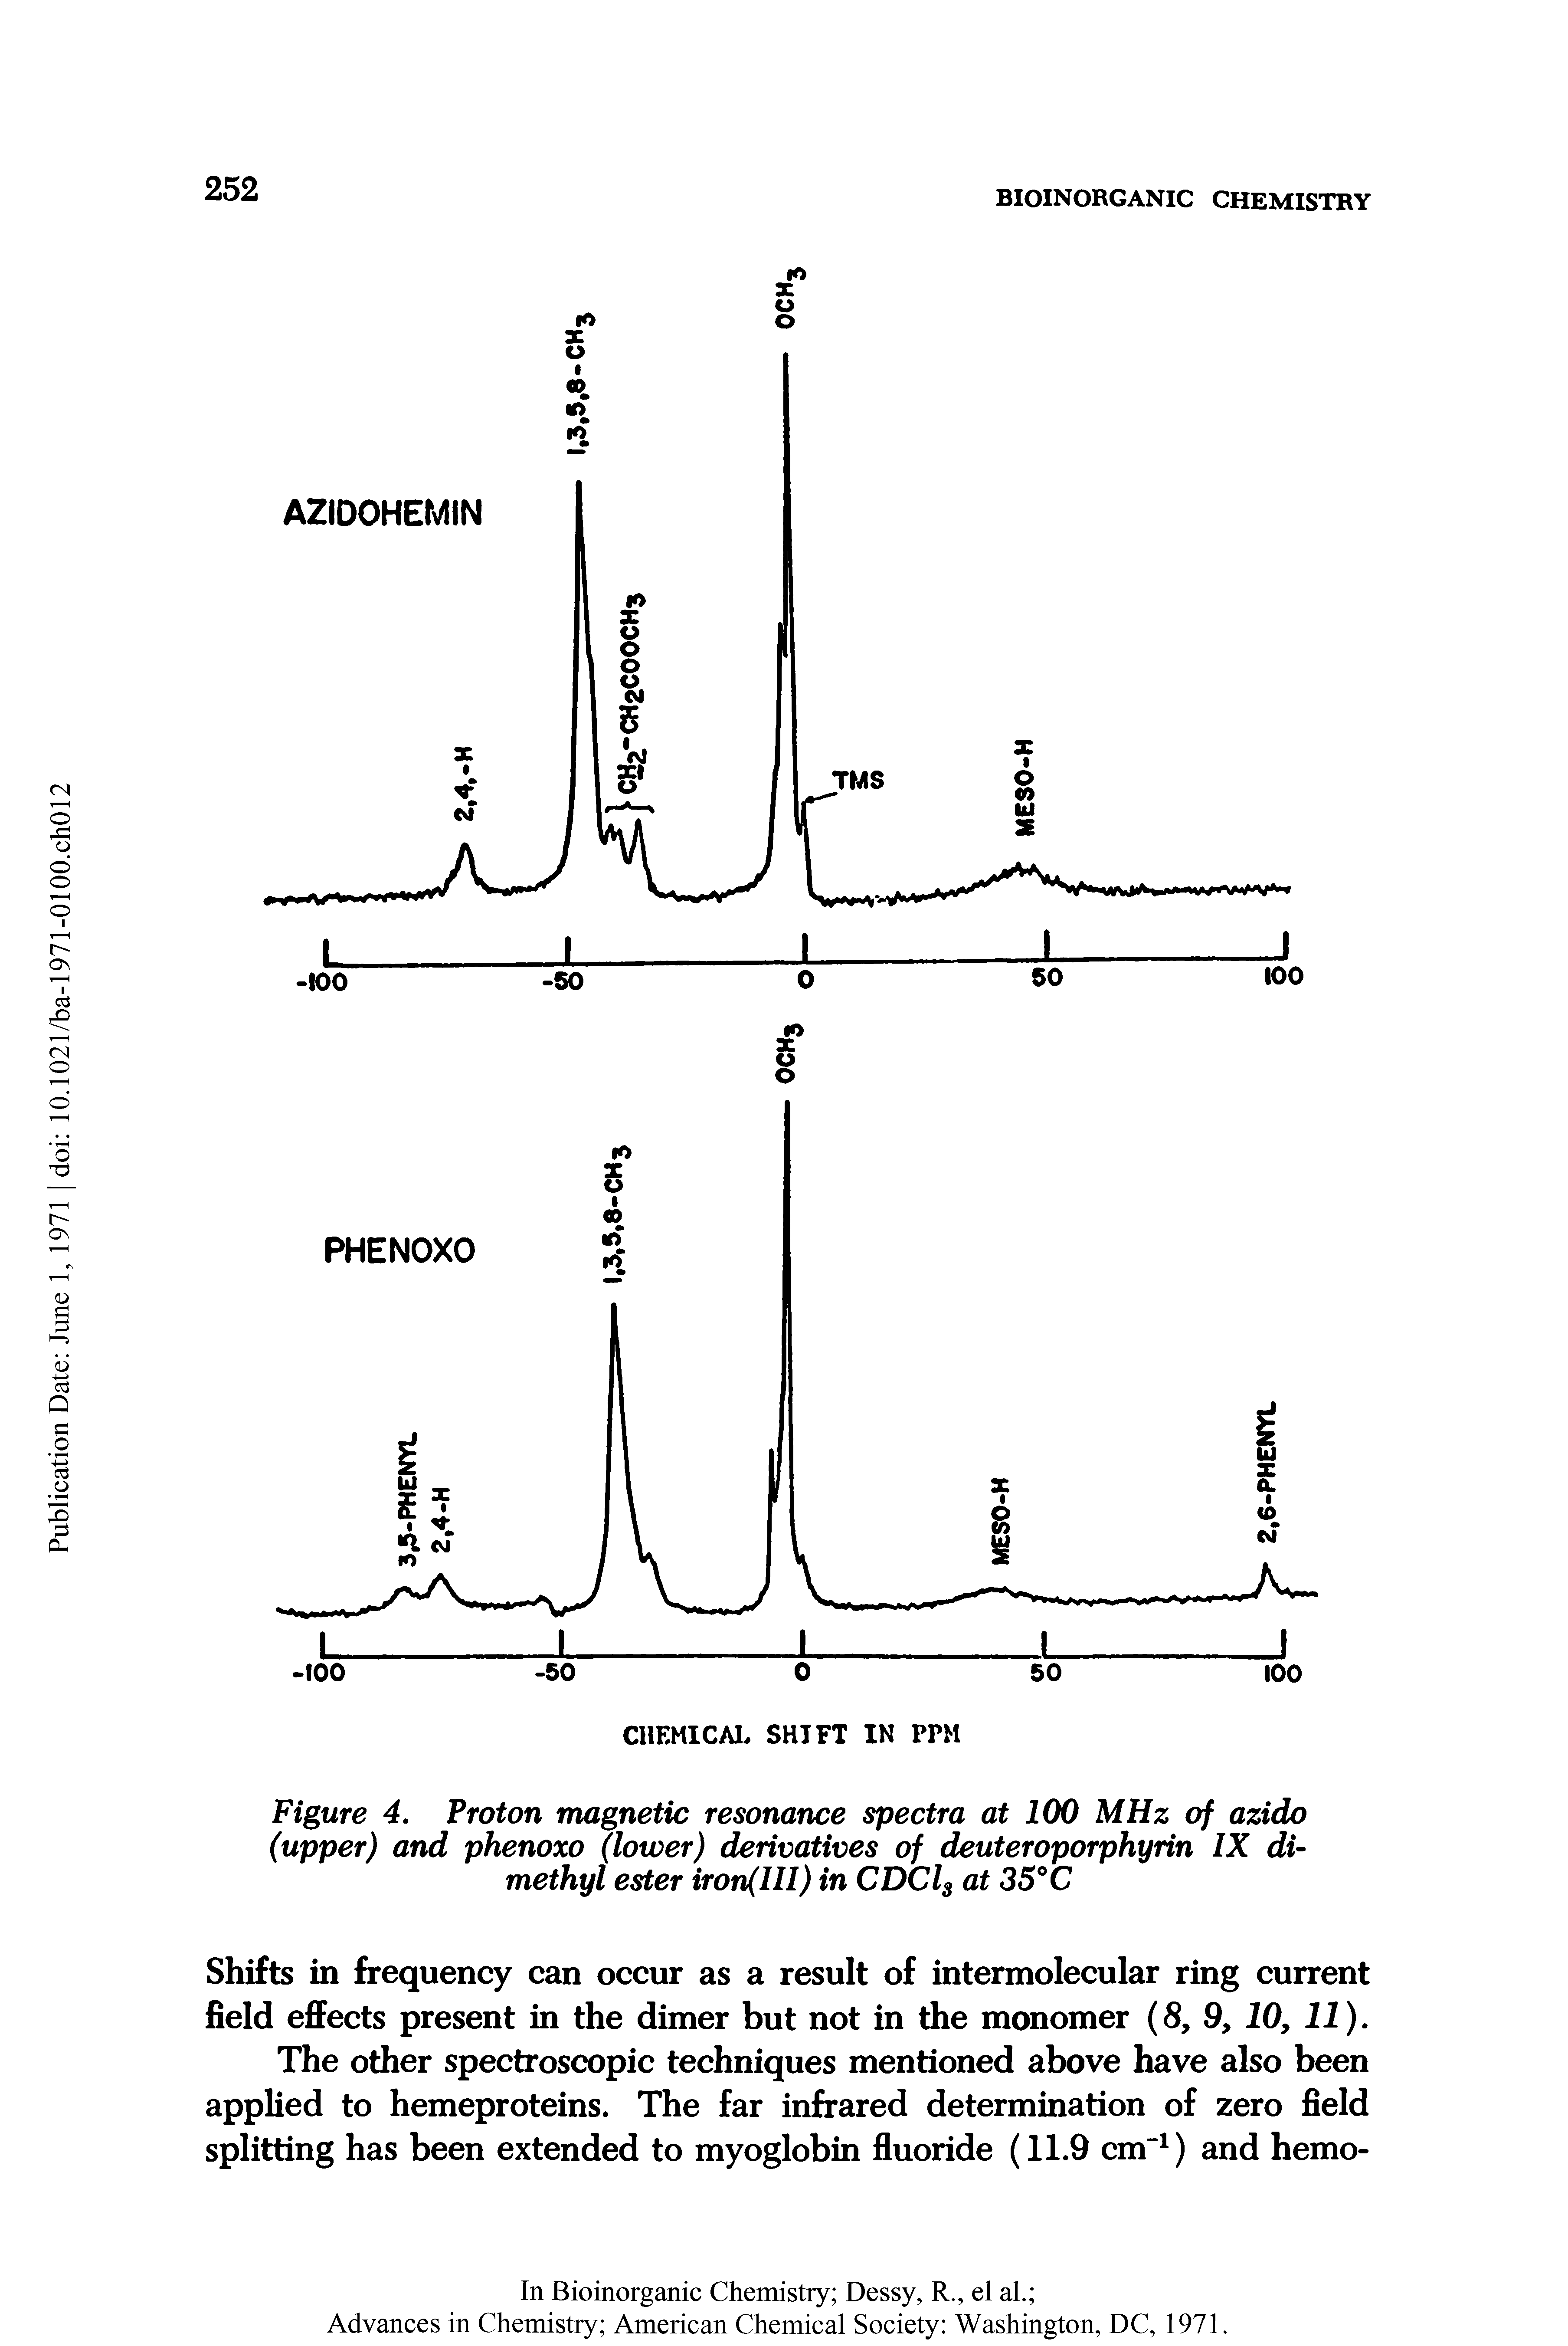 Figure 4. Proton magnetic resonance spectra at 100 MHz of azido (upper) and phenoxo (lower) derivatives of deuteroporphyrin IX dU methyl ester iron(III) in CDCI3 at 35°C...